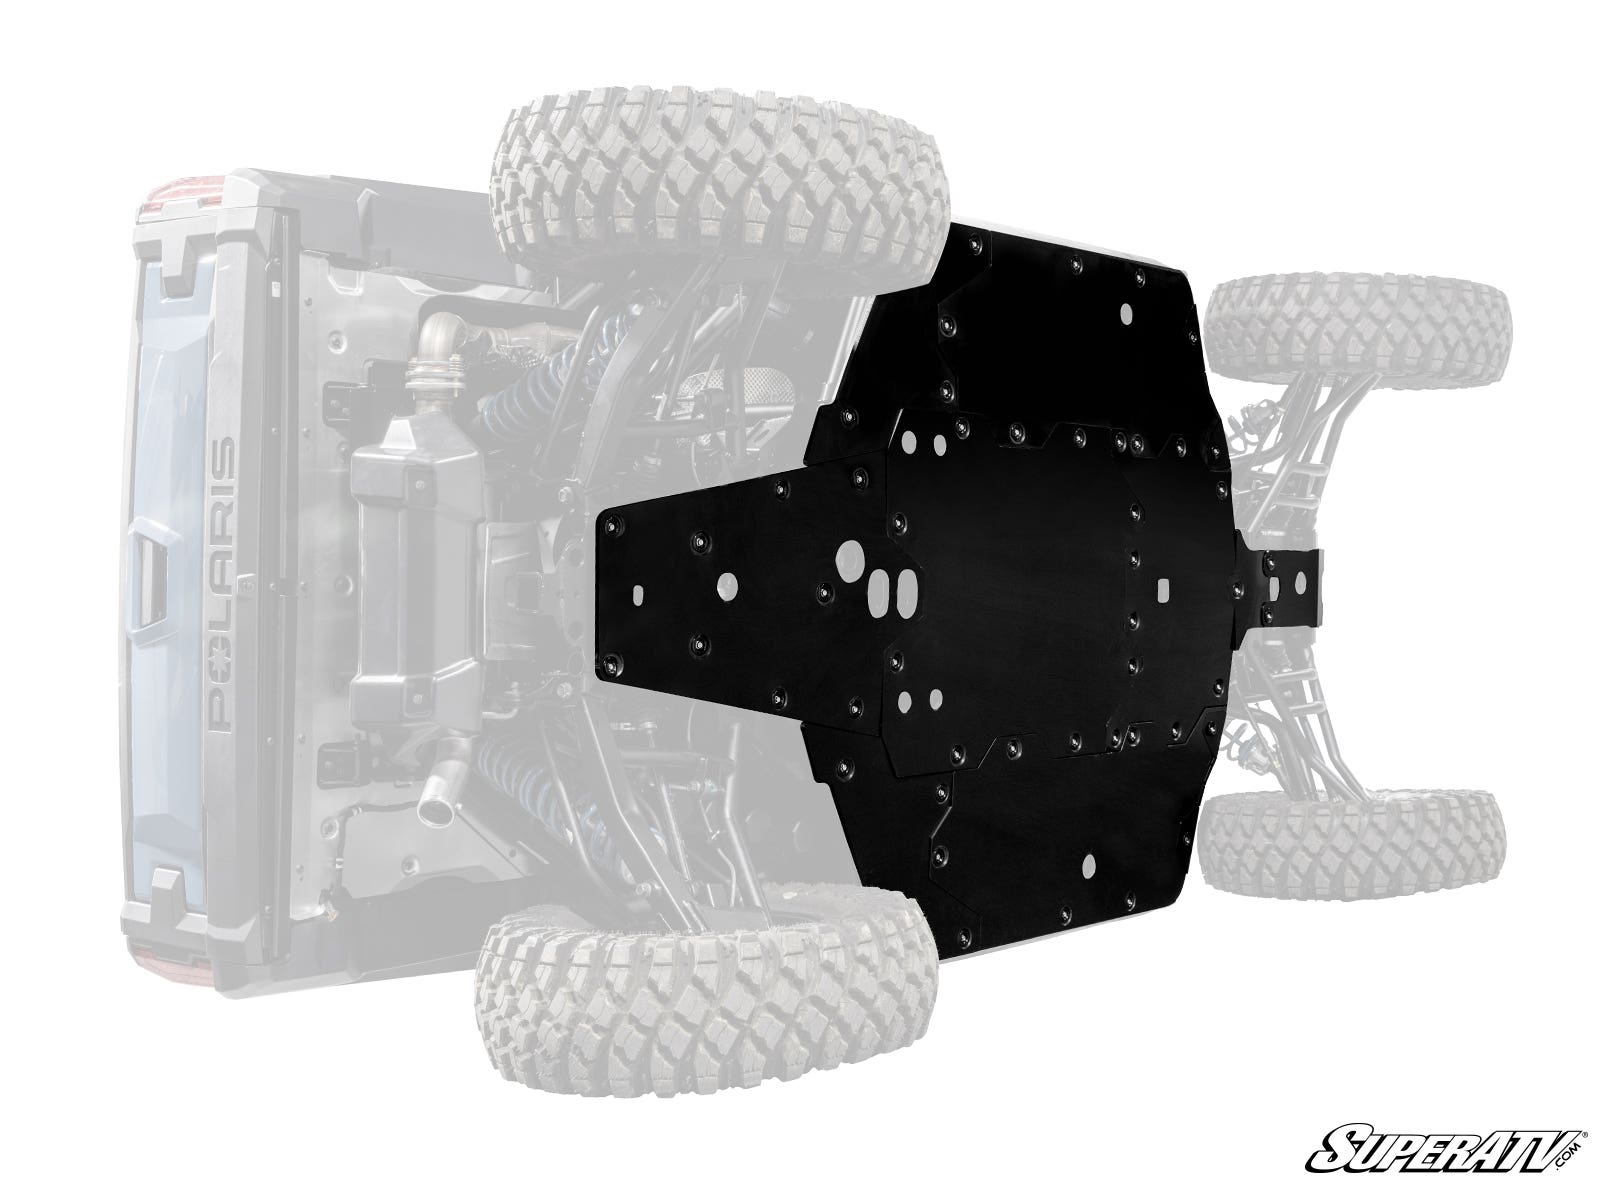 Polaris Xpedition Full Skid Plate